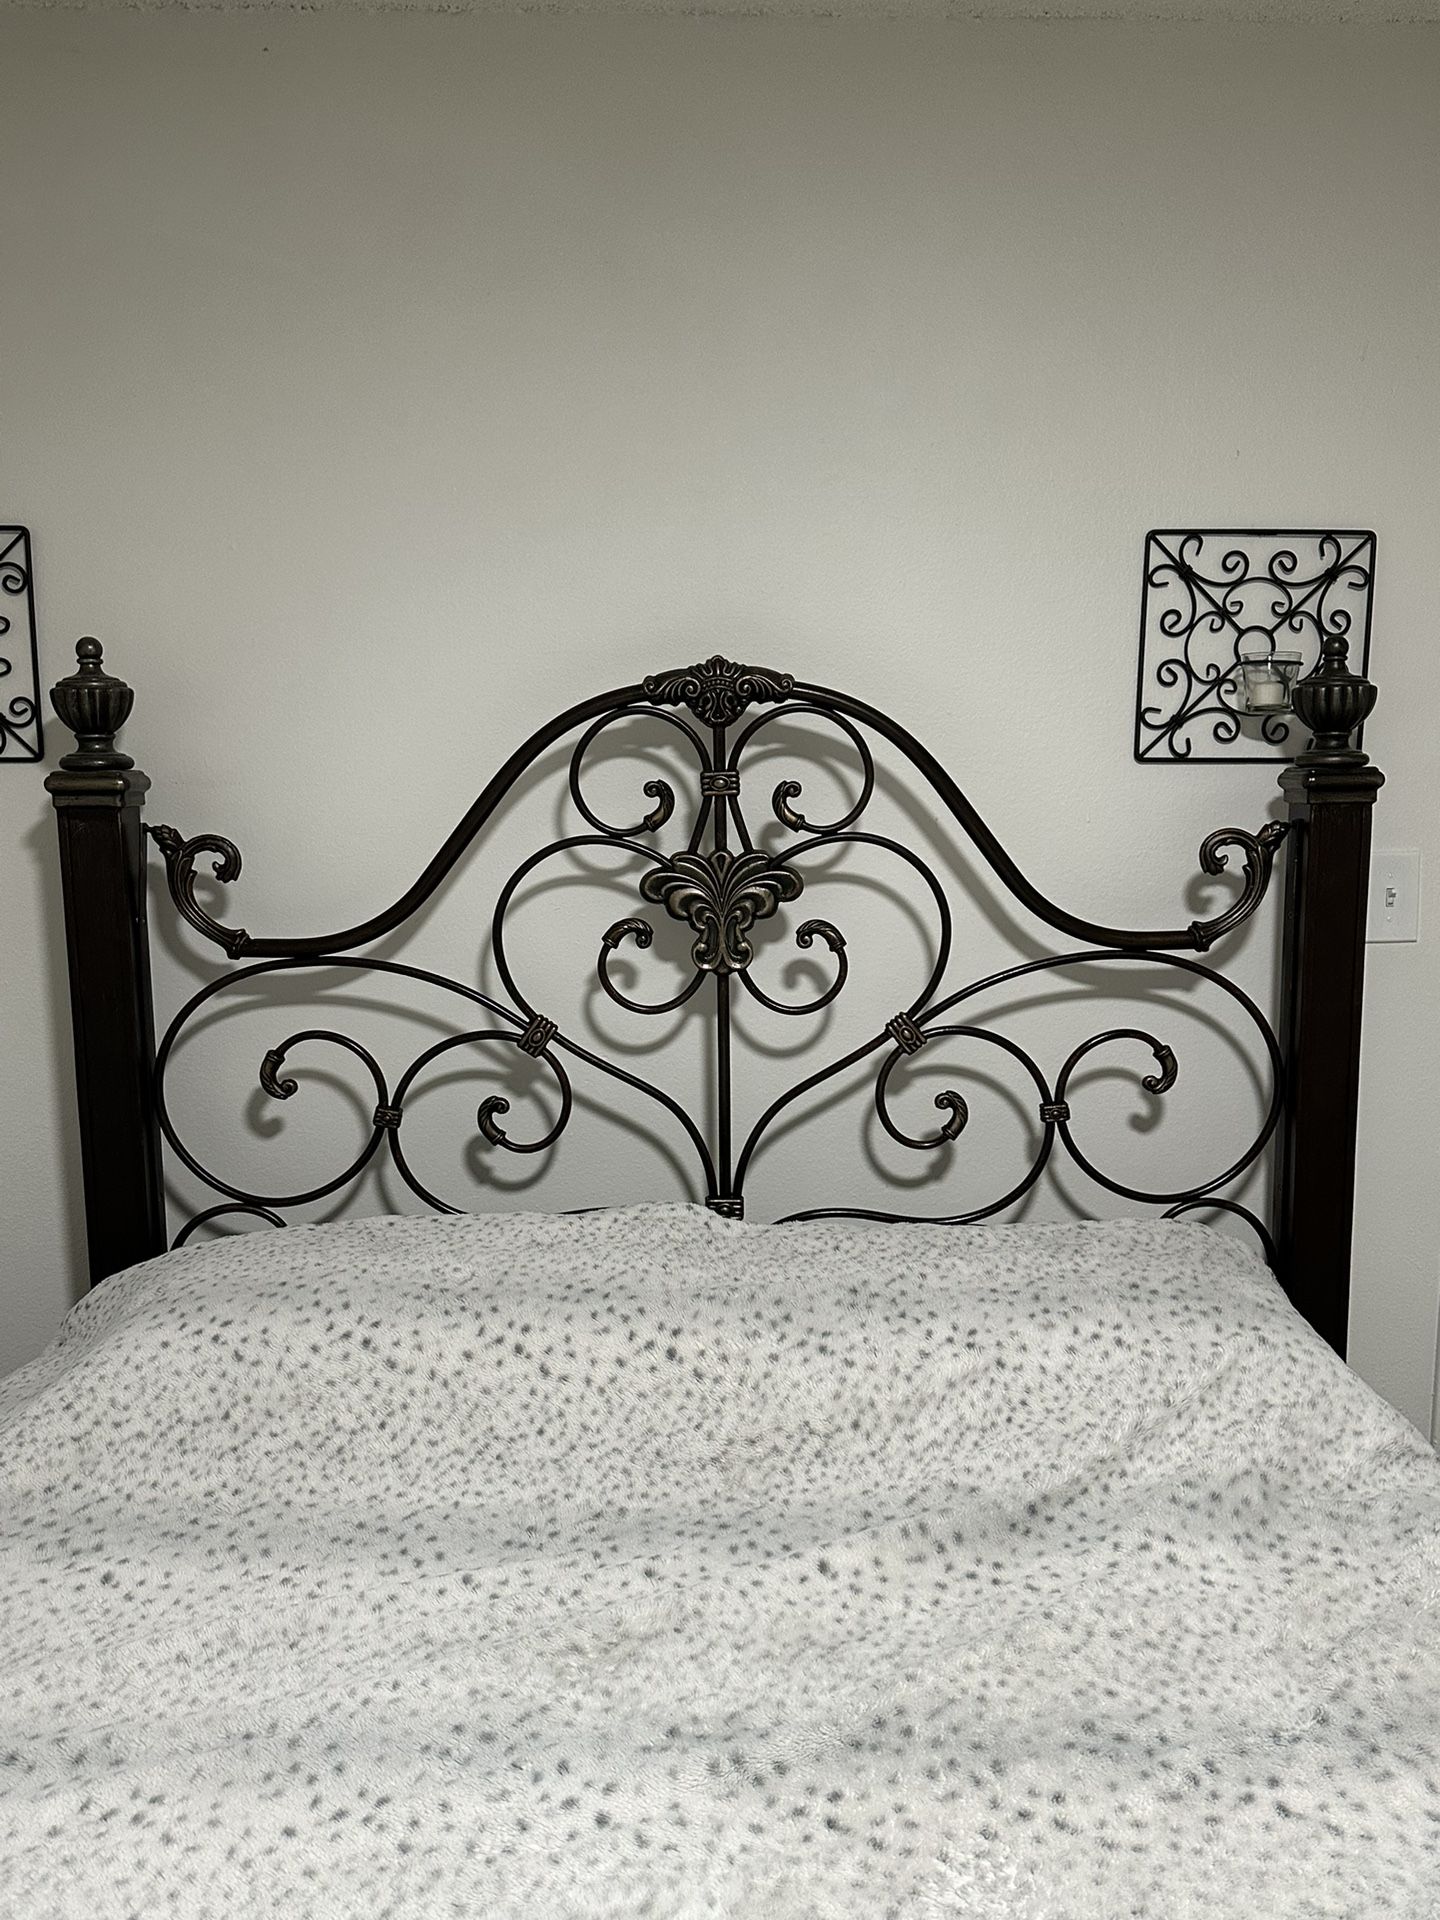 Solid Iron Bed Frame